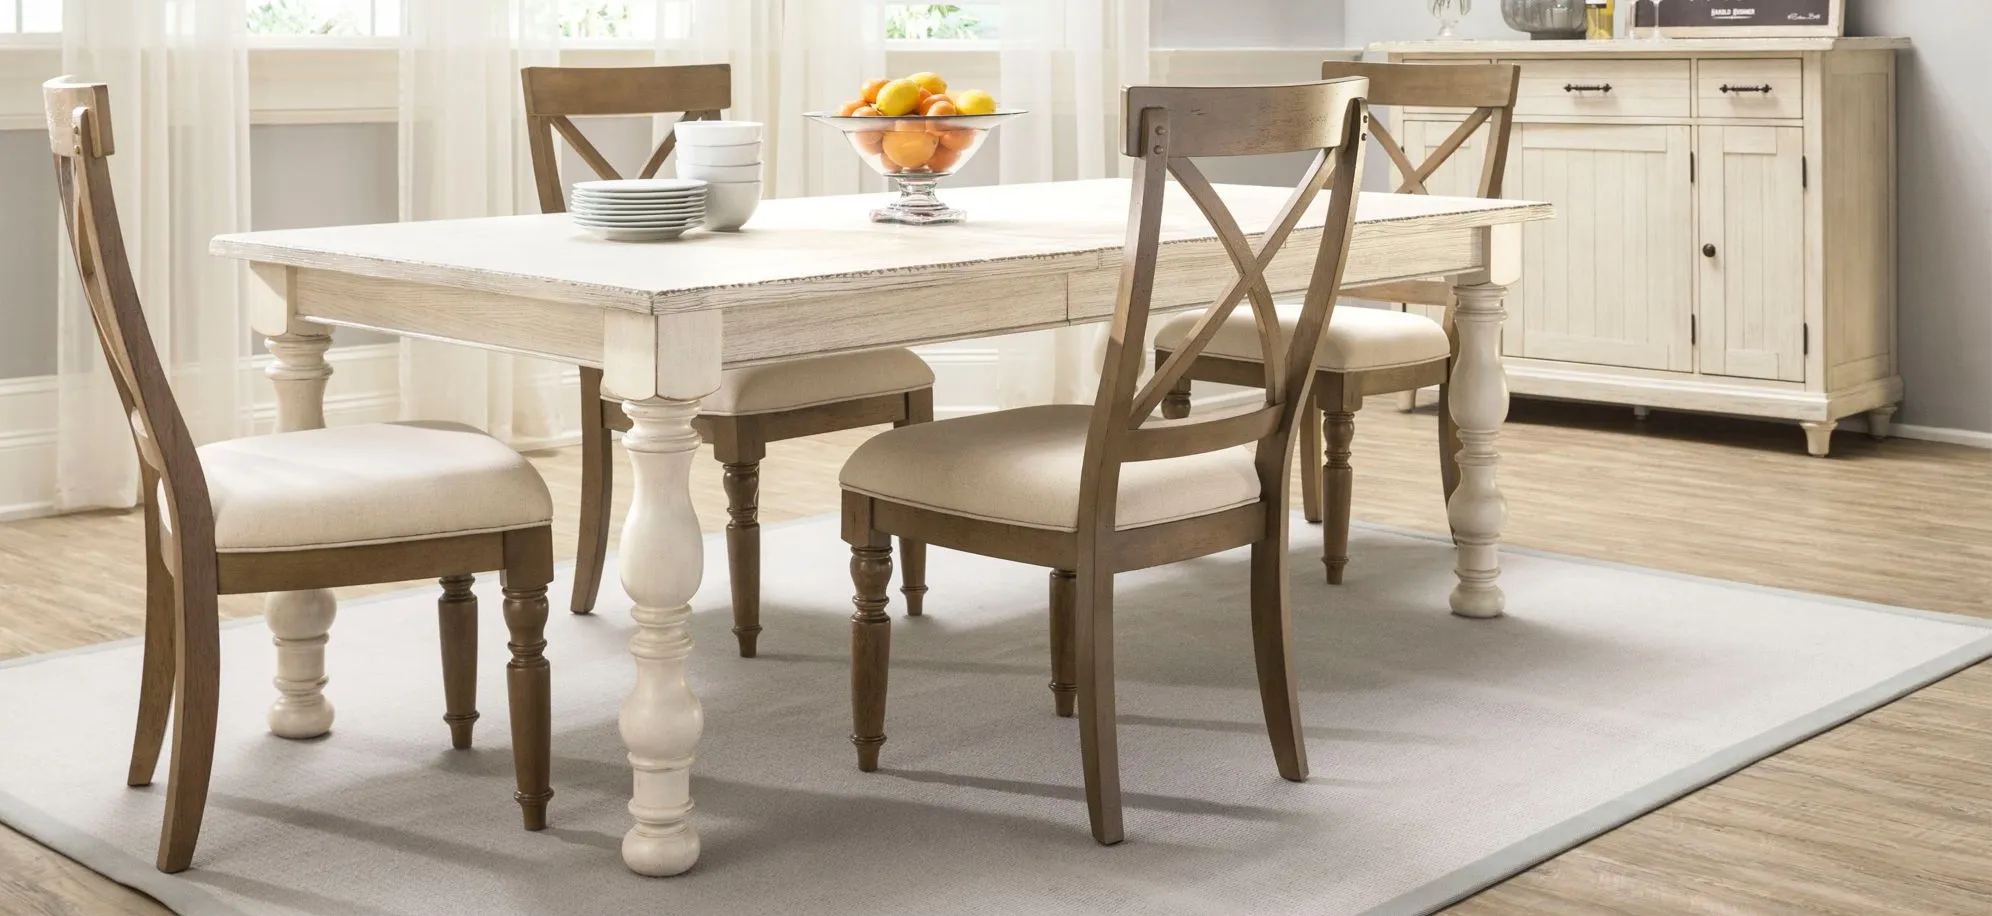 Aberdeen Collection in Weathered Worn White by Riverside Furniture